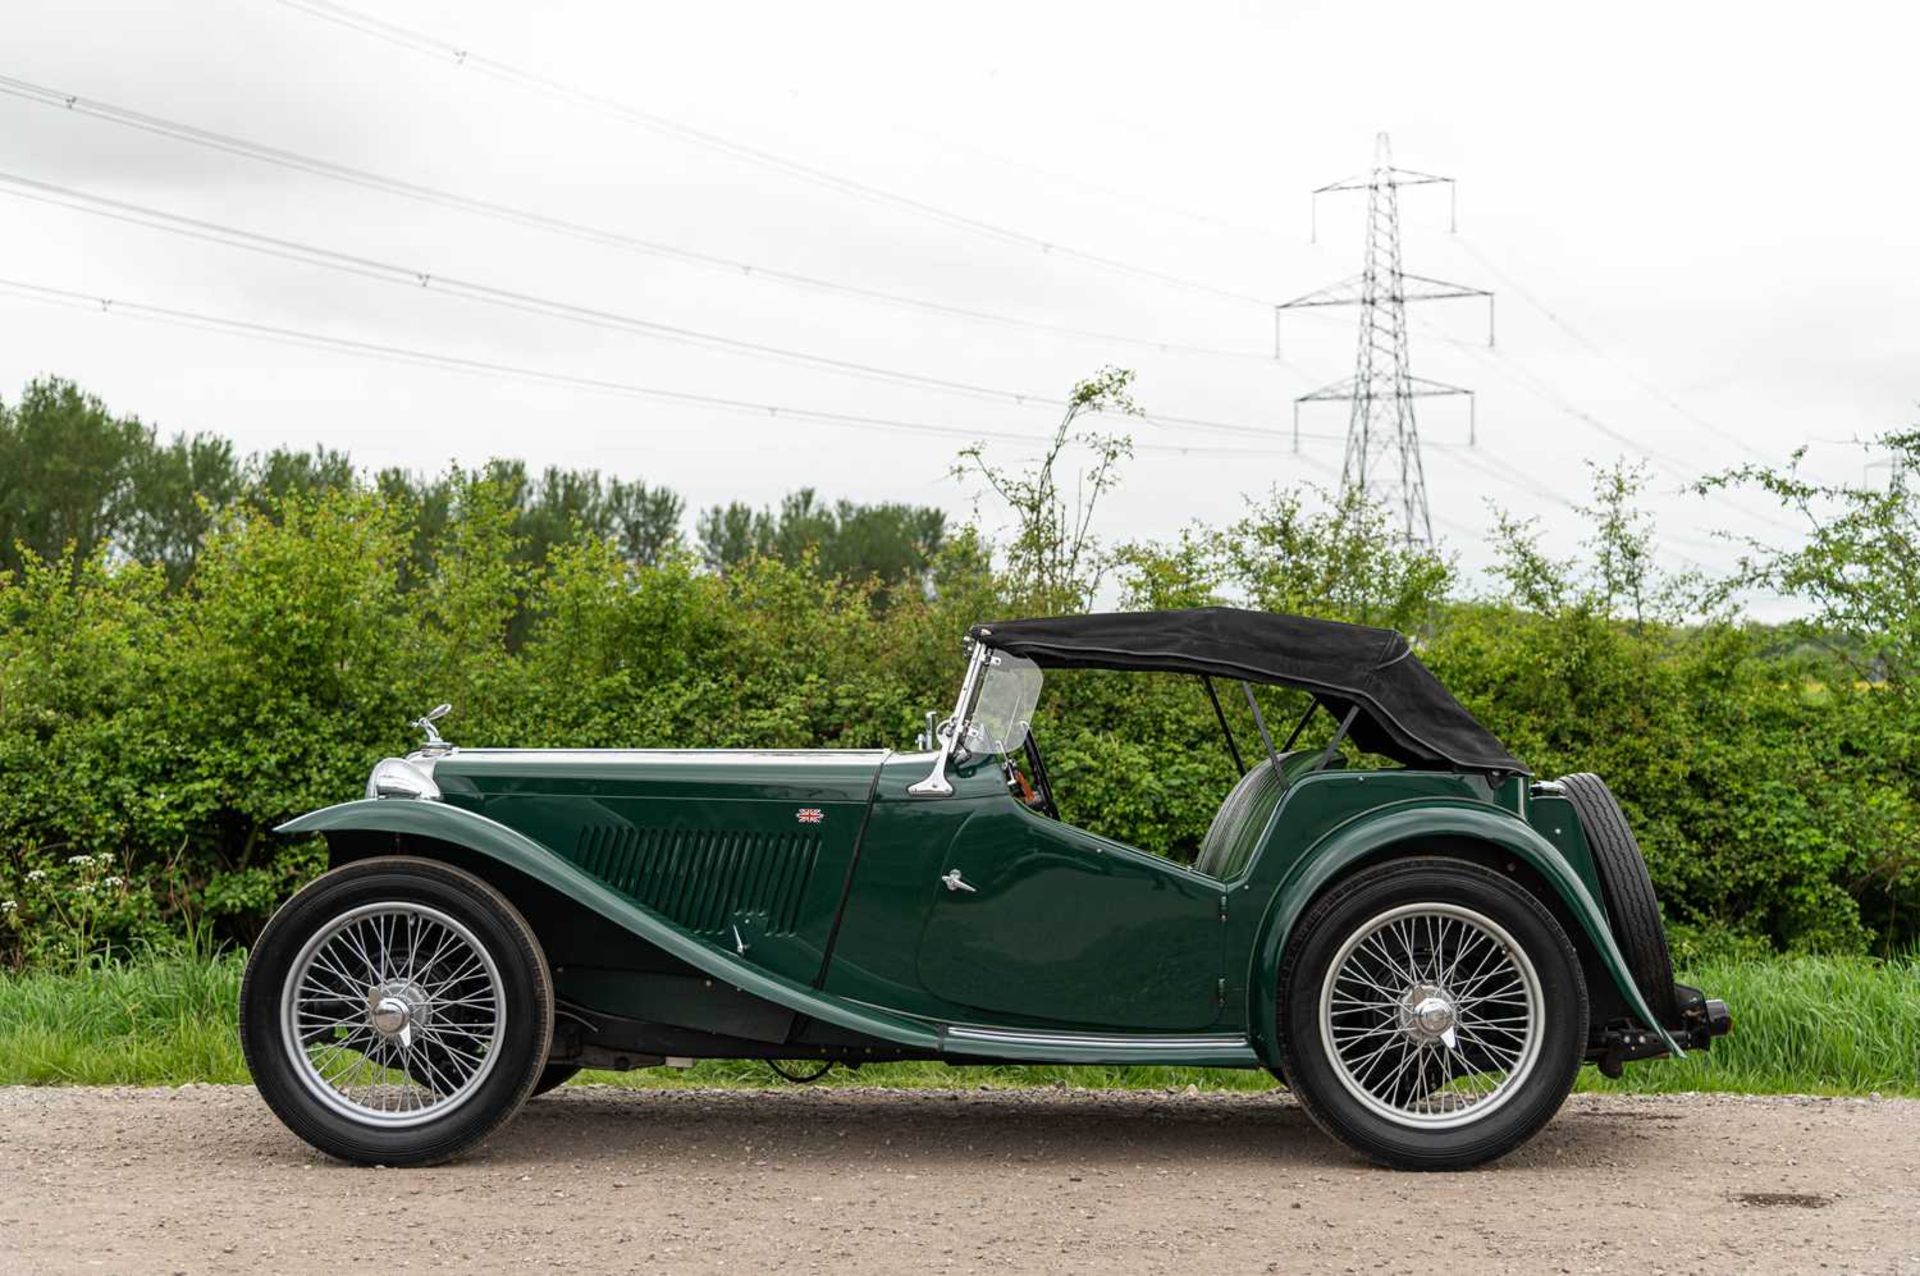 1947 MG TC Midget  Fully restored, right-hand-drive UK home market example - Image 8 of 76